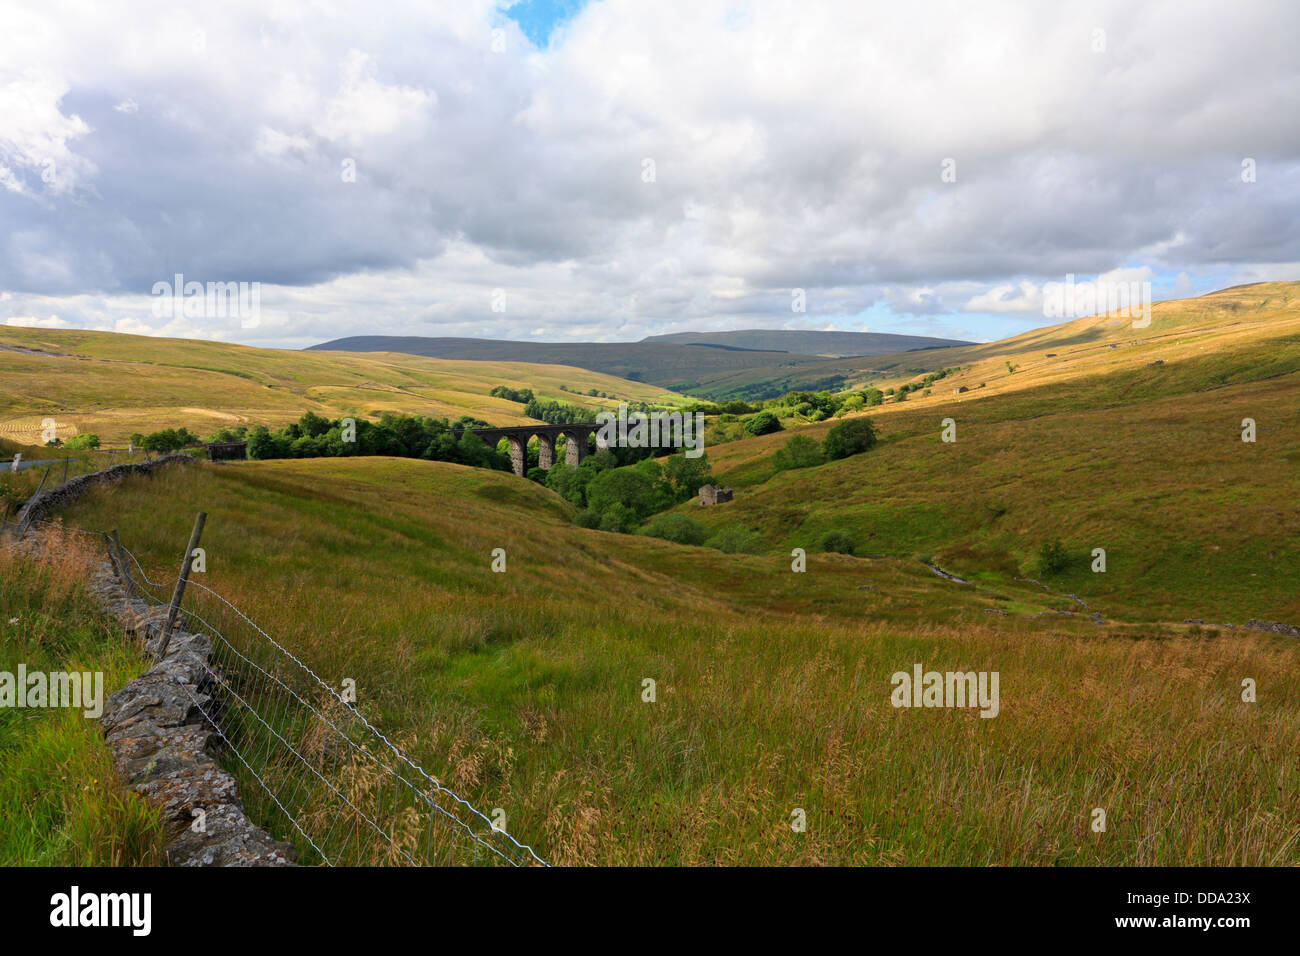 Dent Head Viaduct, Cowgill, Dent towards Baugh Fell, Cumbria, Yorkshire Dales National Park, England, UK. Stock Photo